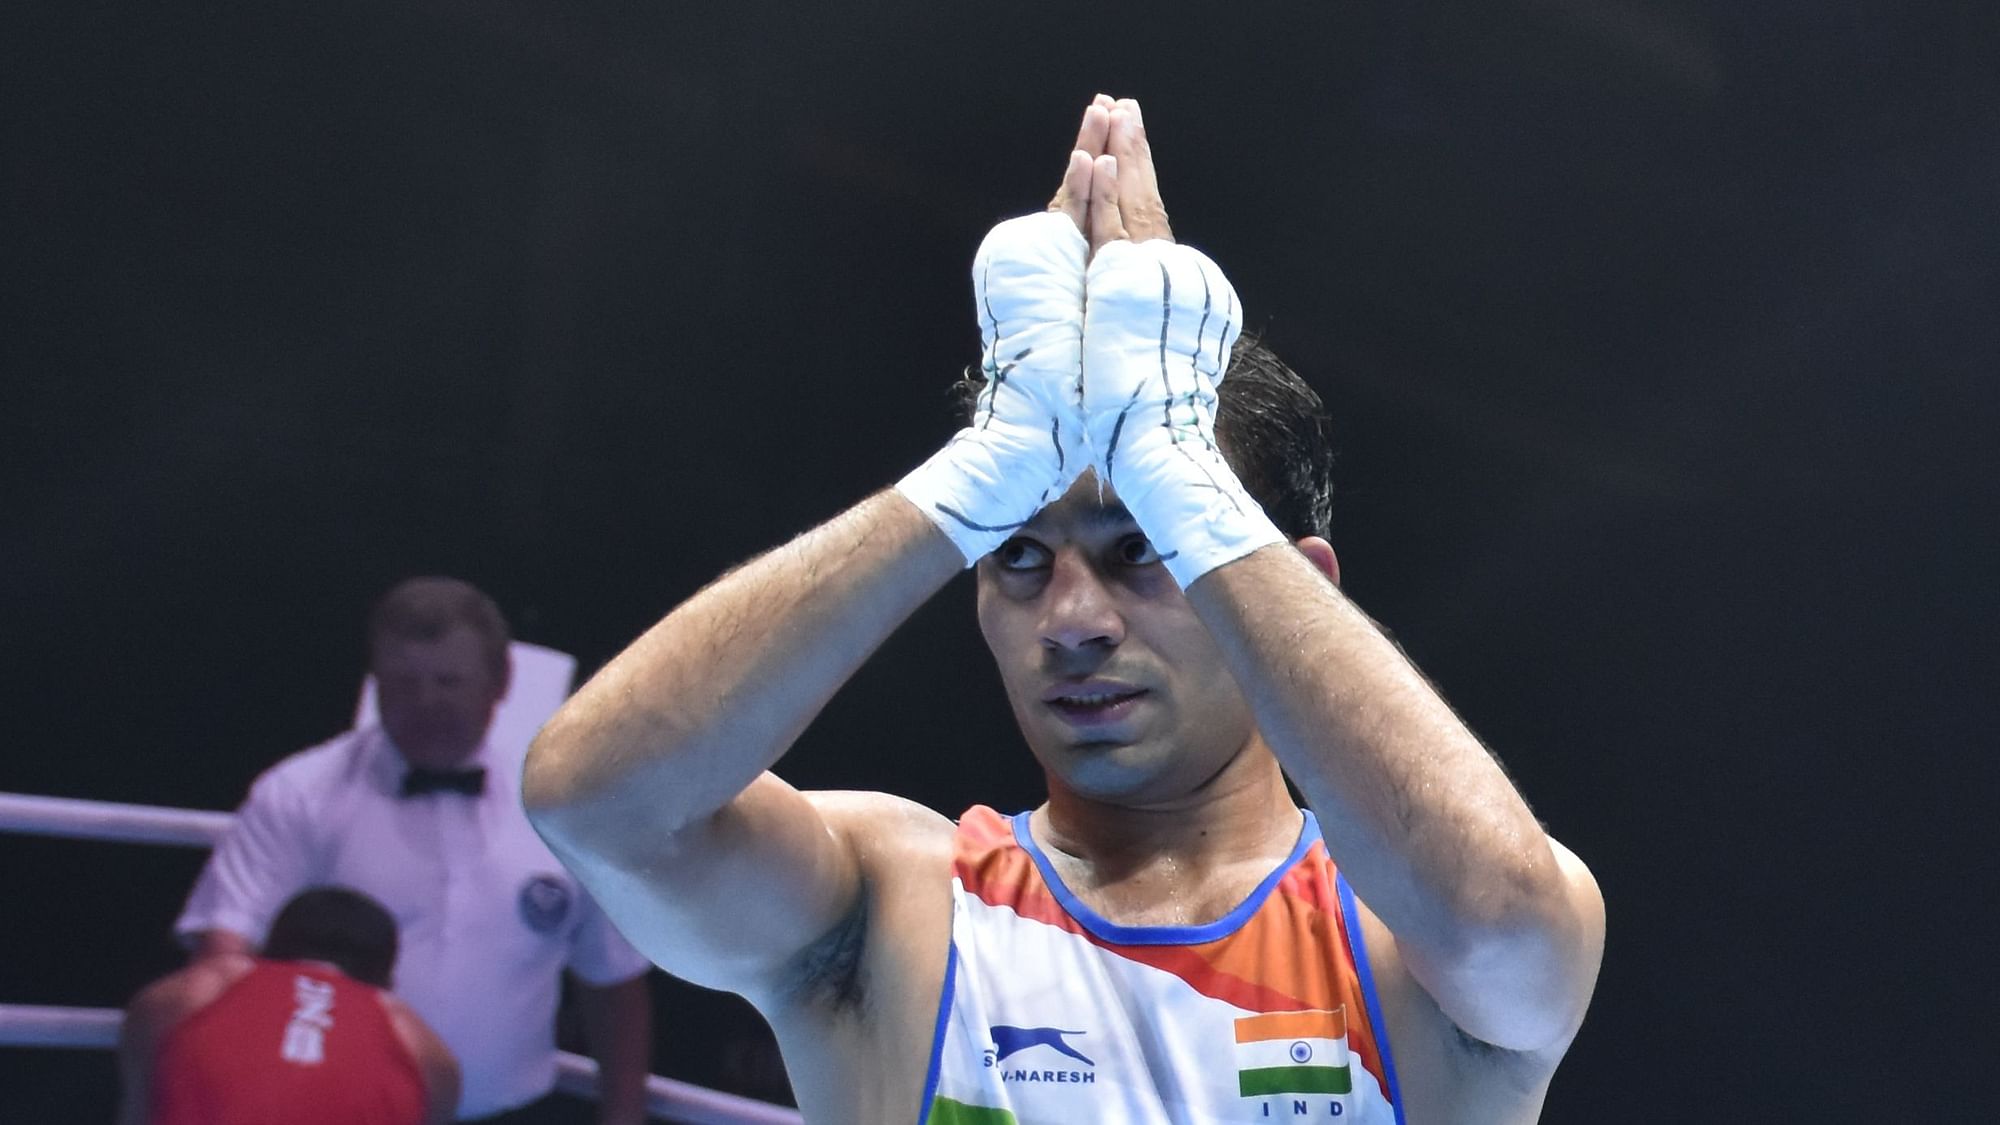 Amit Panghal became the first Indian male boxer to claim a silver medal at the World Championships  